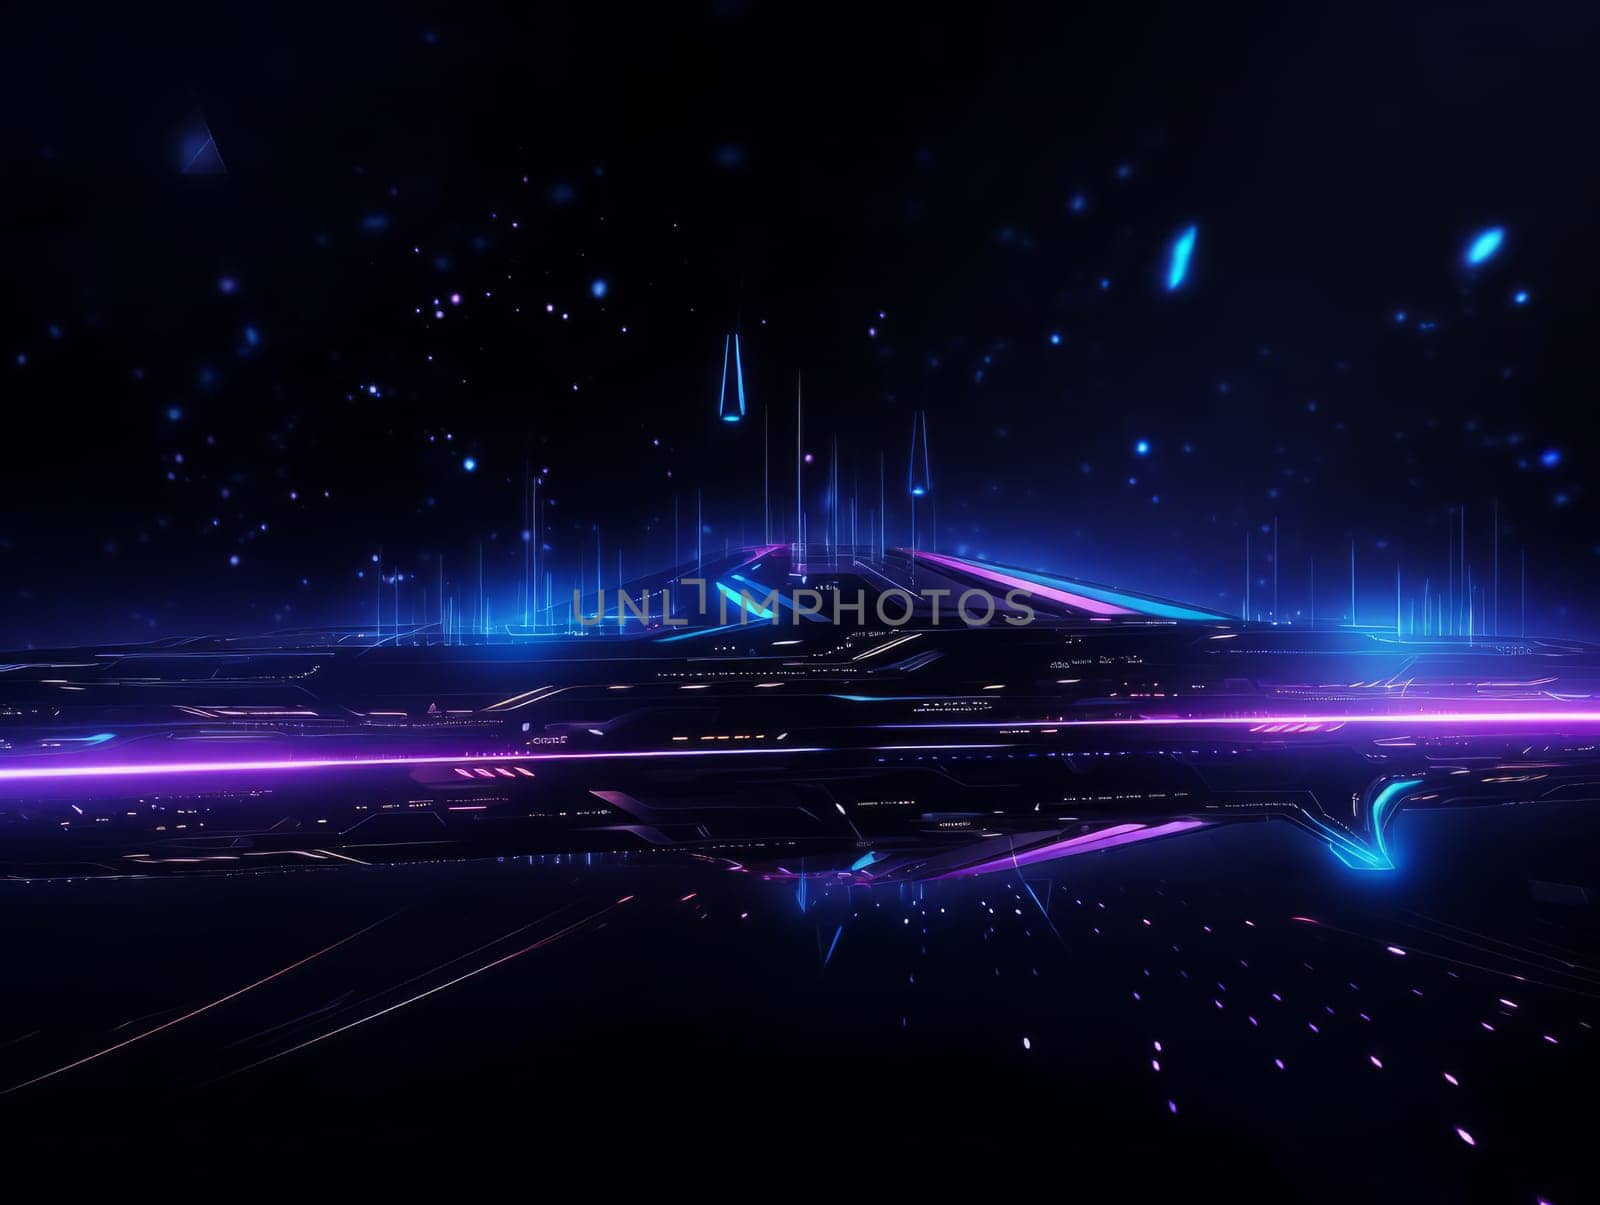 Abstract technology, blue and purple neon background of lines and dots, science and technology business concept of digital future technologies. AI